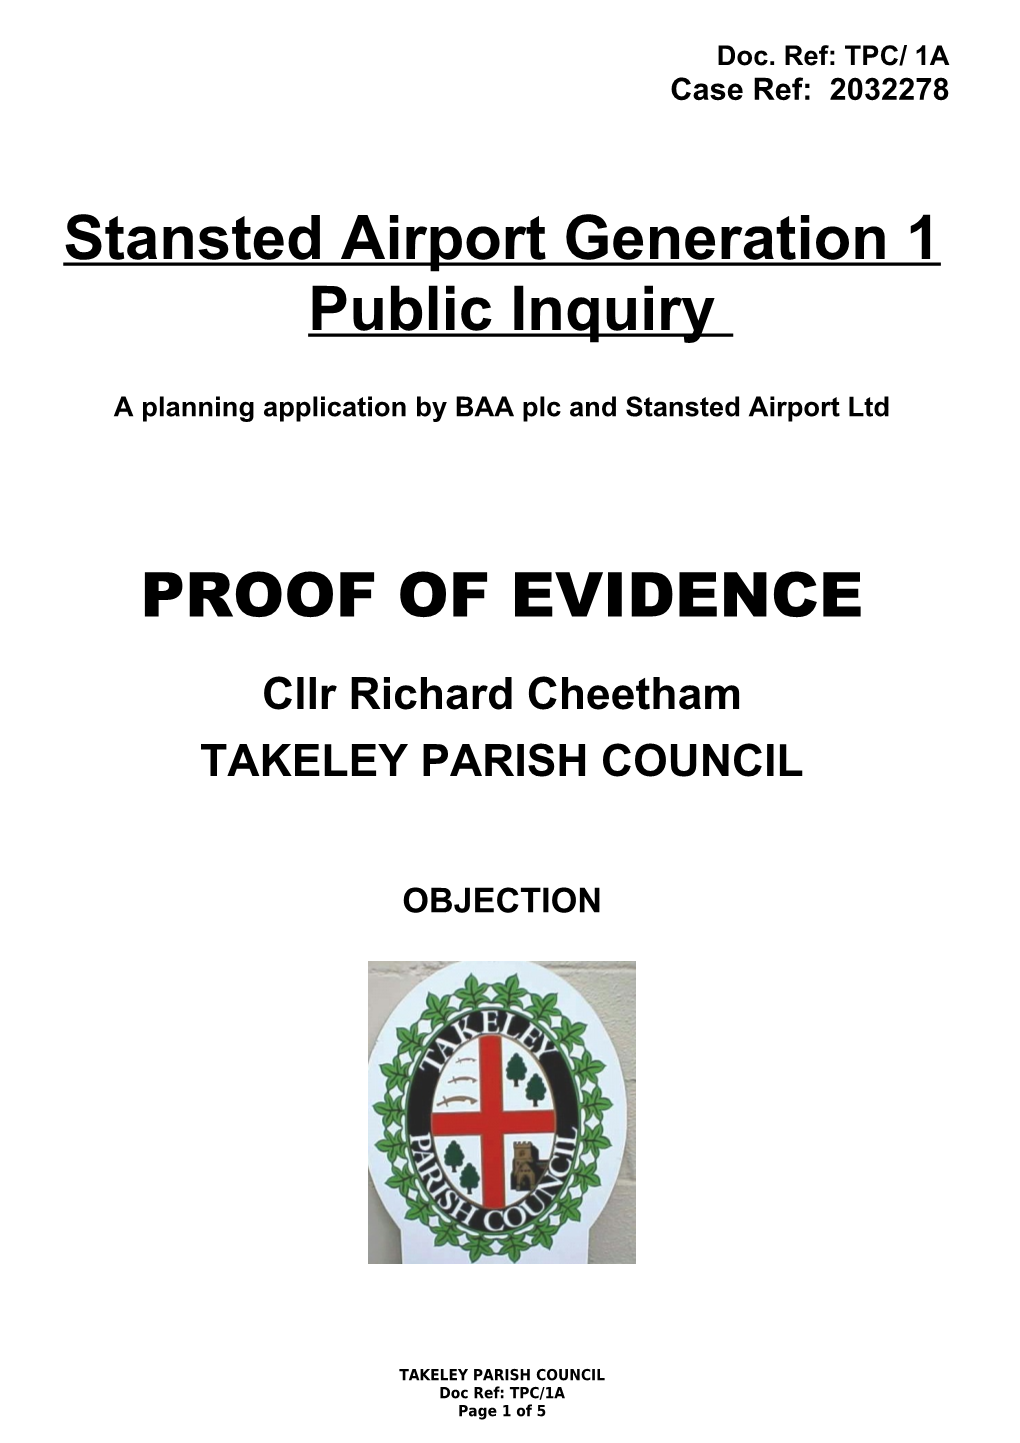 Stansted G1 Public Inquiry Commencing 30 May 2007